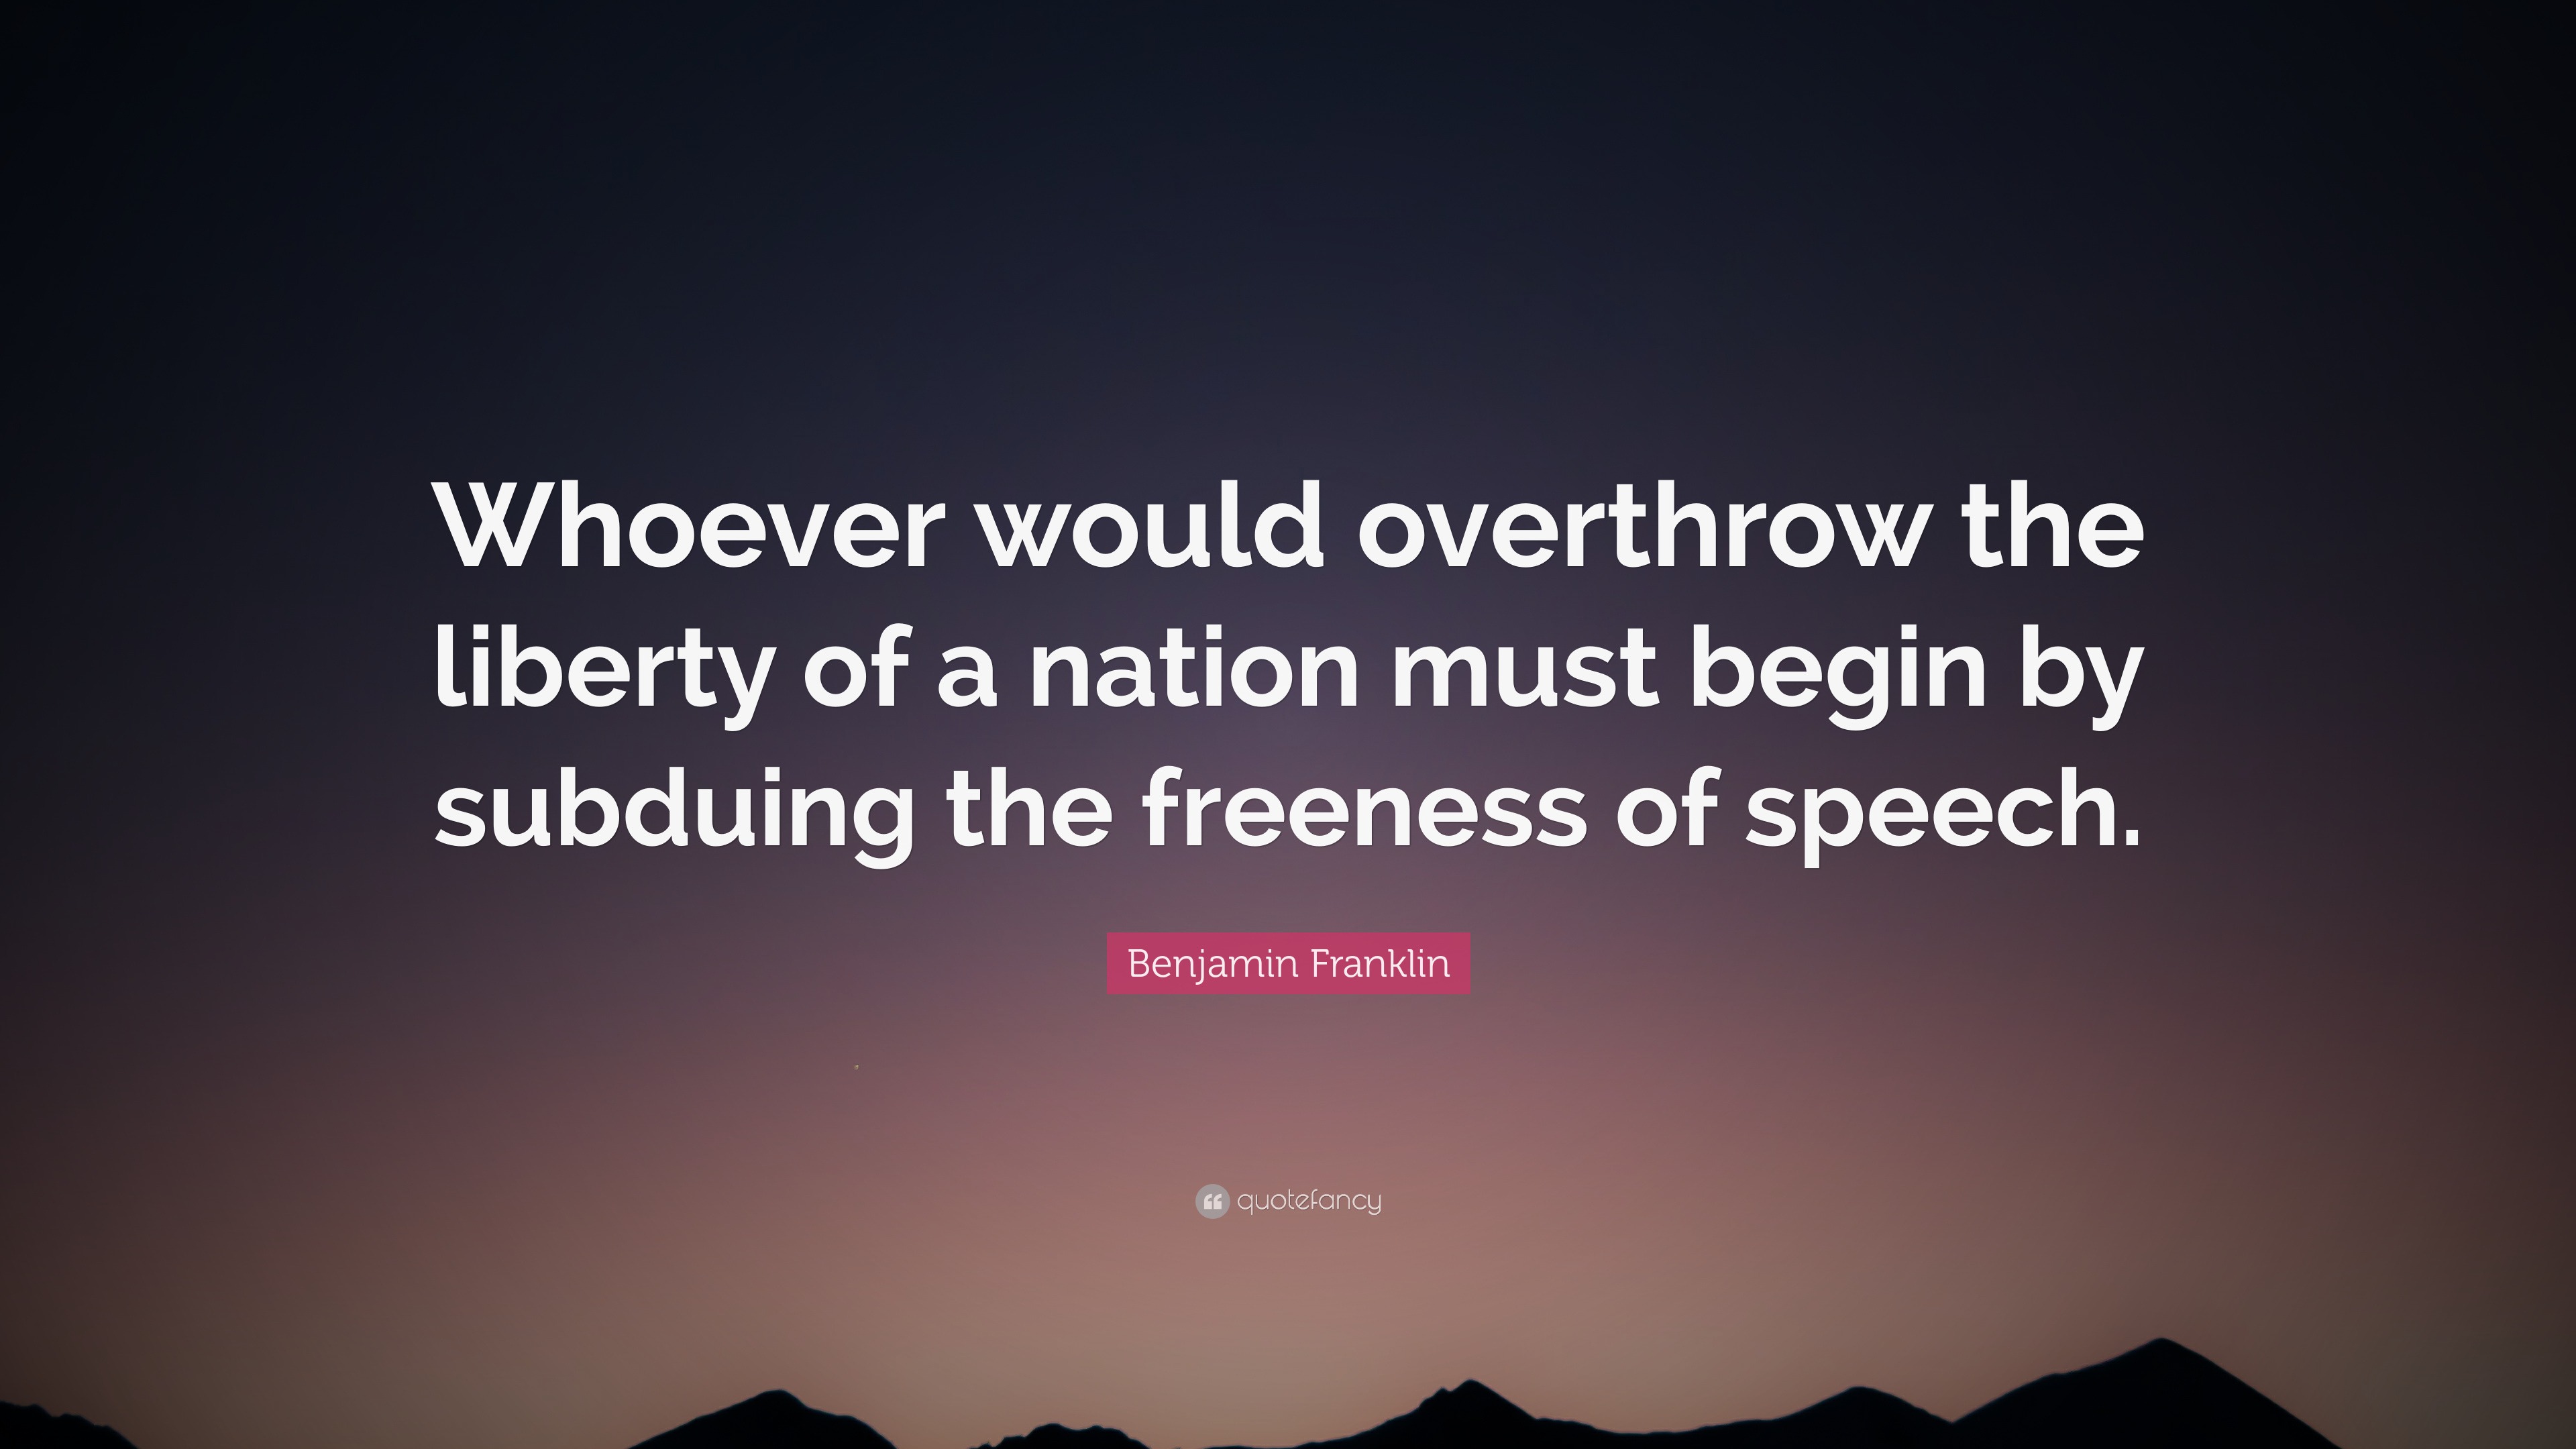 Benjamin Franklin Quote: “Whoever would overthrow the liberty of a